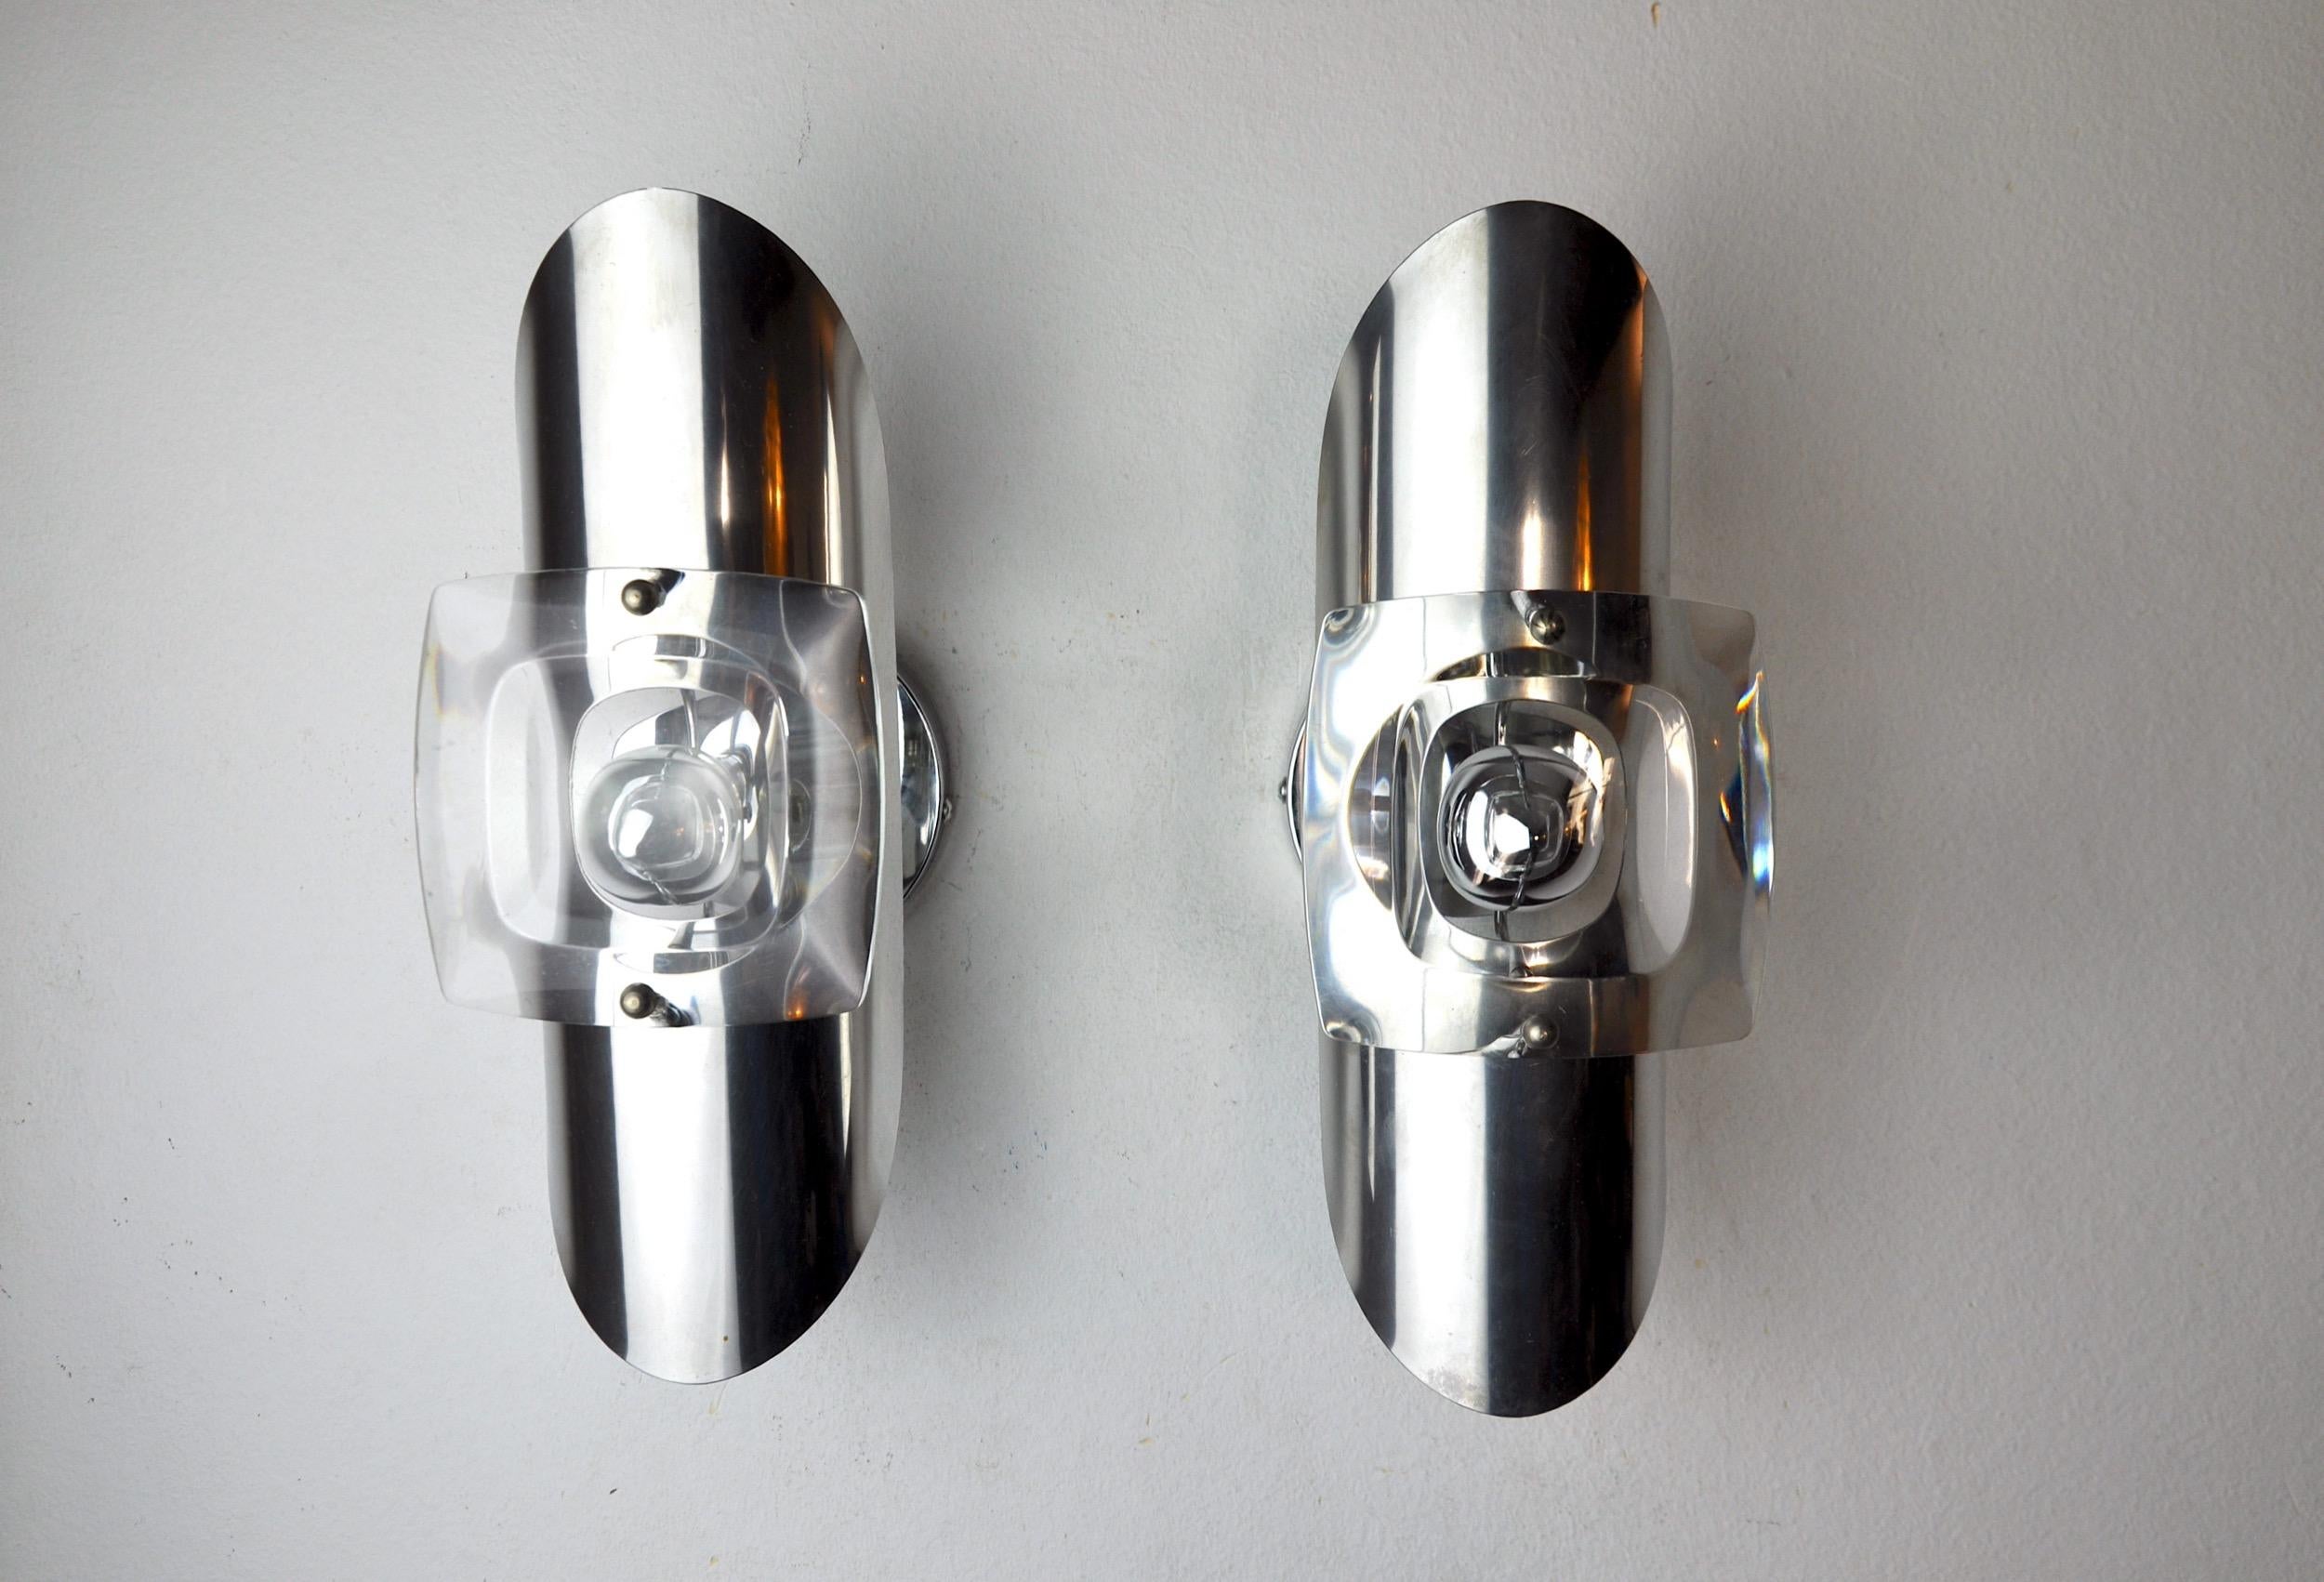 Hollywood Regency Pair of Oscar Torlasco Wall Lamps, Murano Glass, Italy, 1970 For Sale